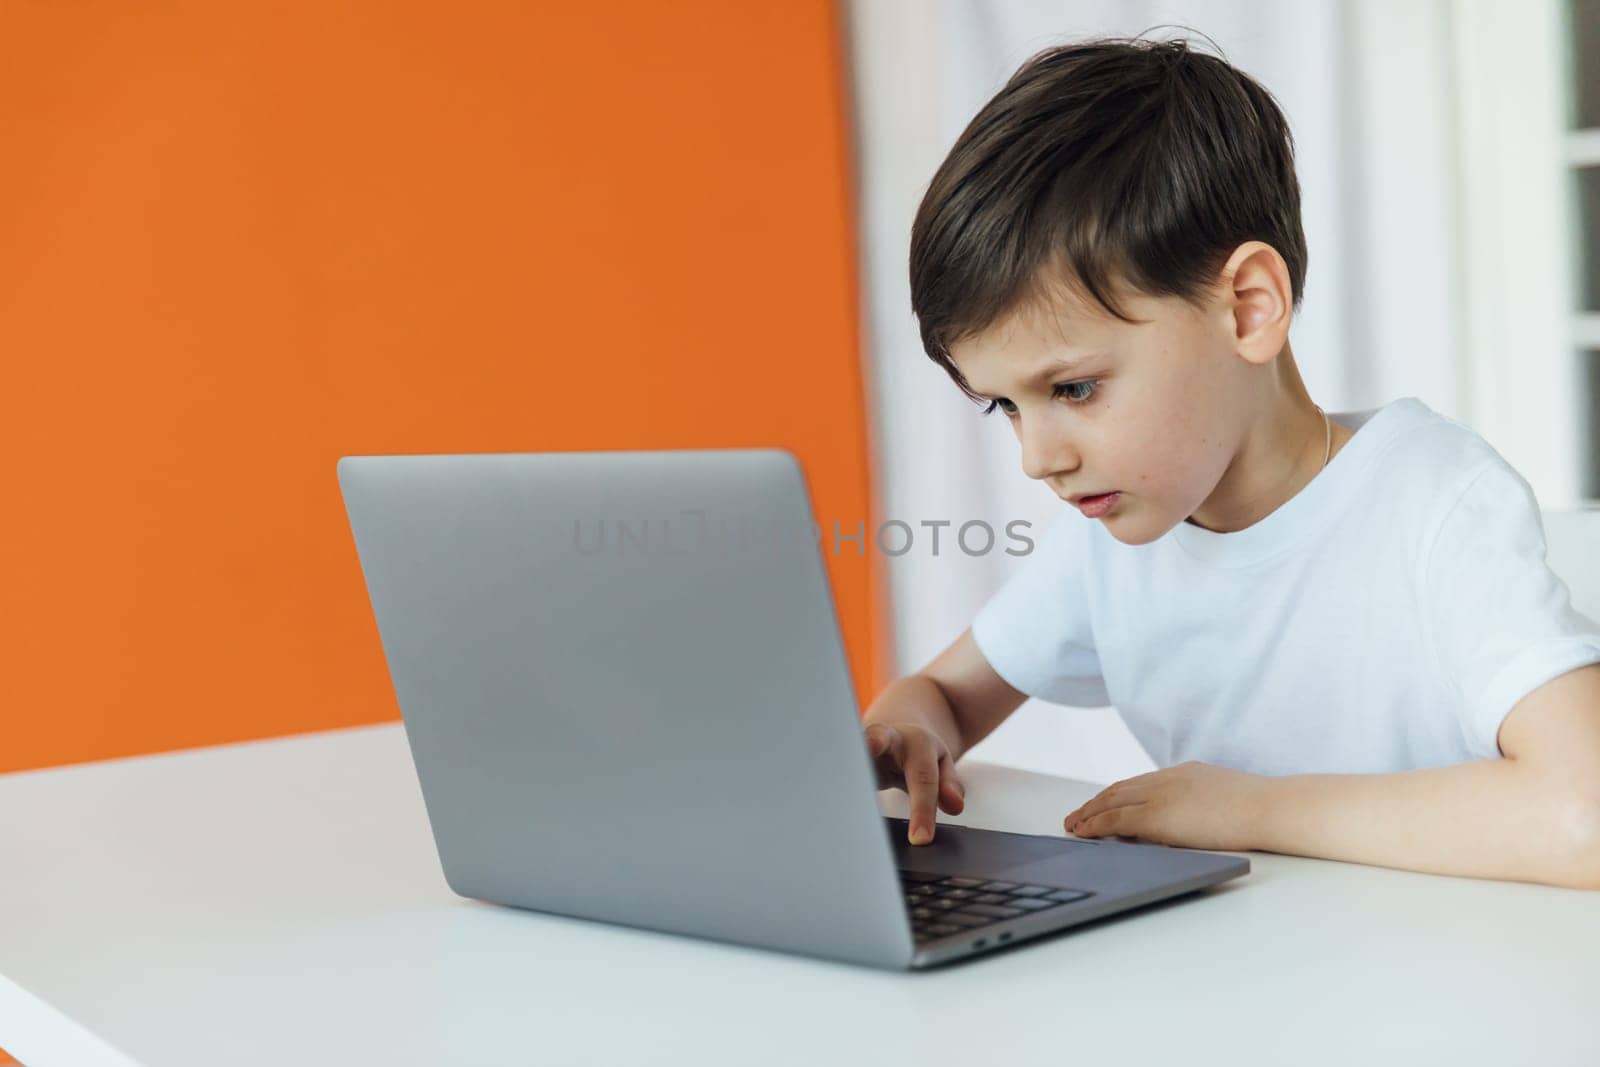 online school in the classroom homeschooling student education lessons boy schoolboy learns at the computer by Simakov